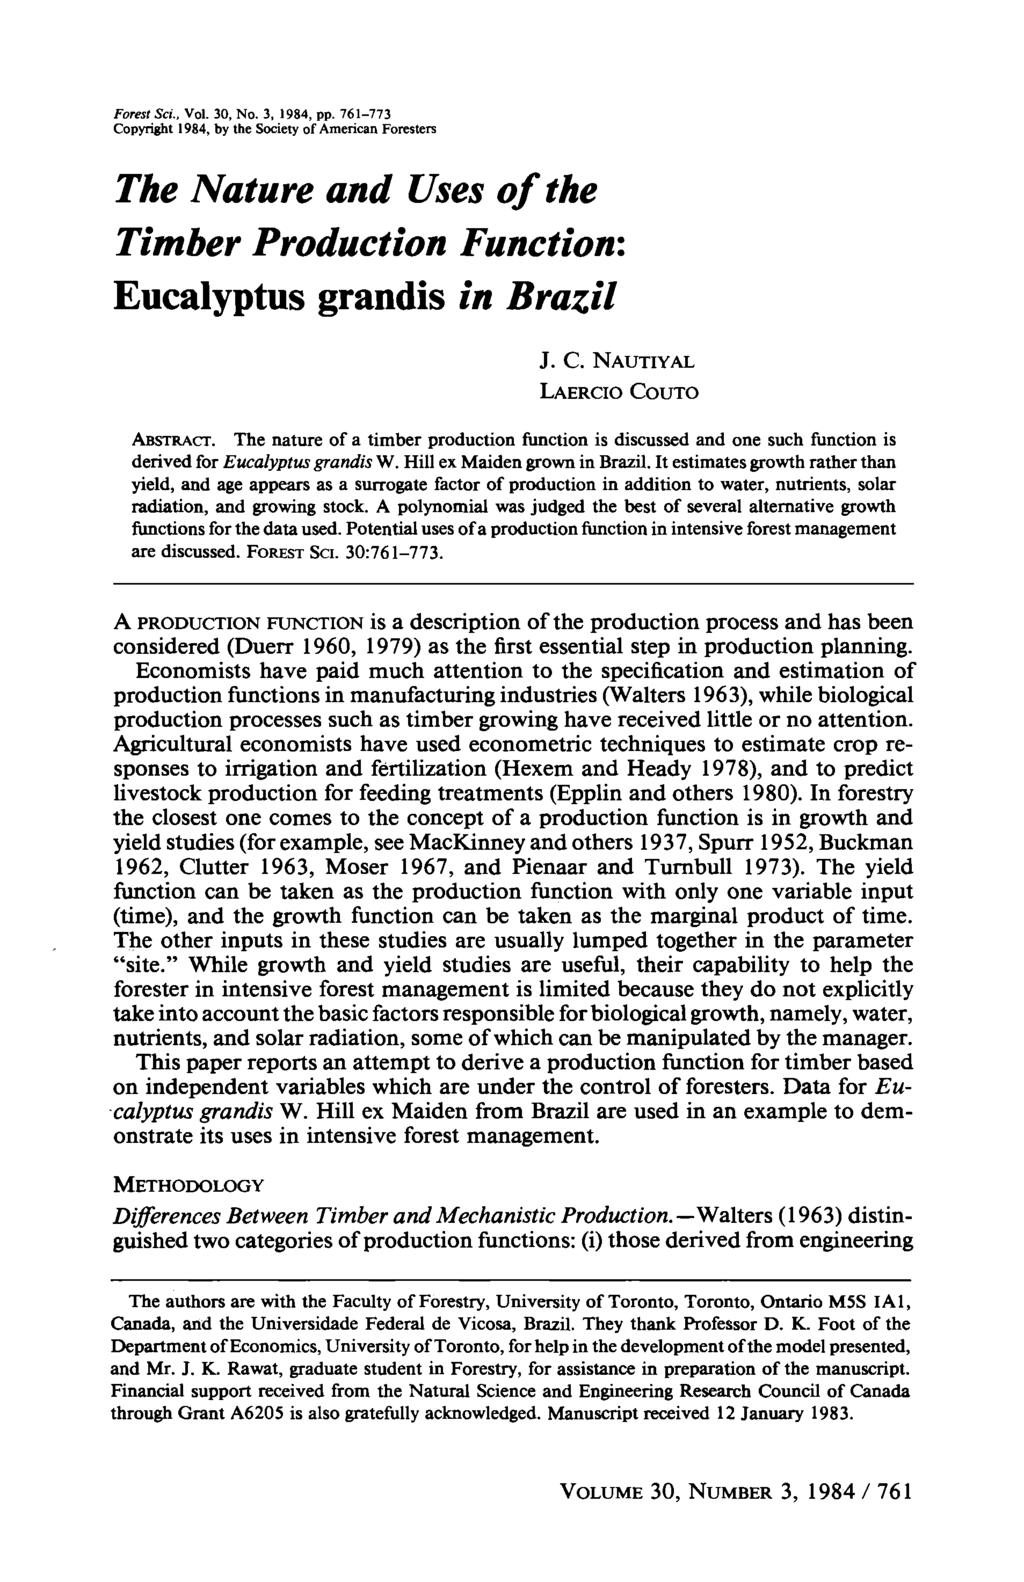 Forest Sci., Vol. 30, No. 3, 1984, pp. 761-773 Copyright 1984, by the Society of American Foresters The Nature and Uses of the Timber Production Function: Eucalyptus grandis in Brazil J. C. NAUTIYAL LAERCIO COUTO ABSTRACT.